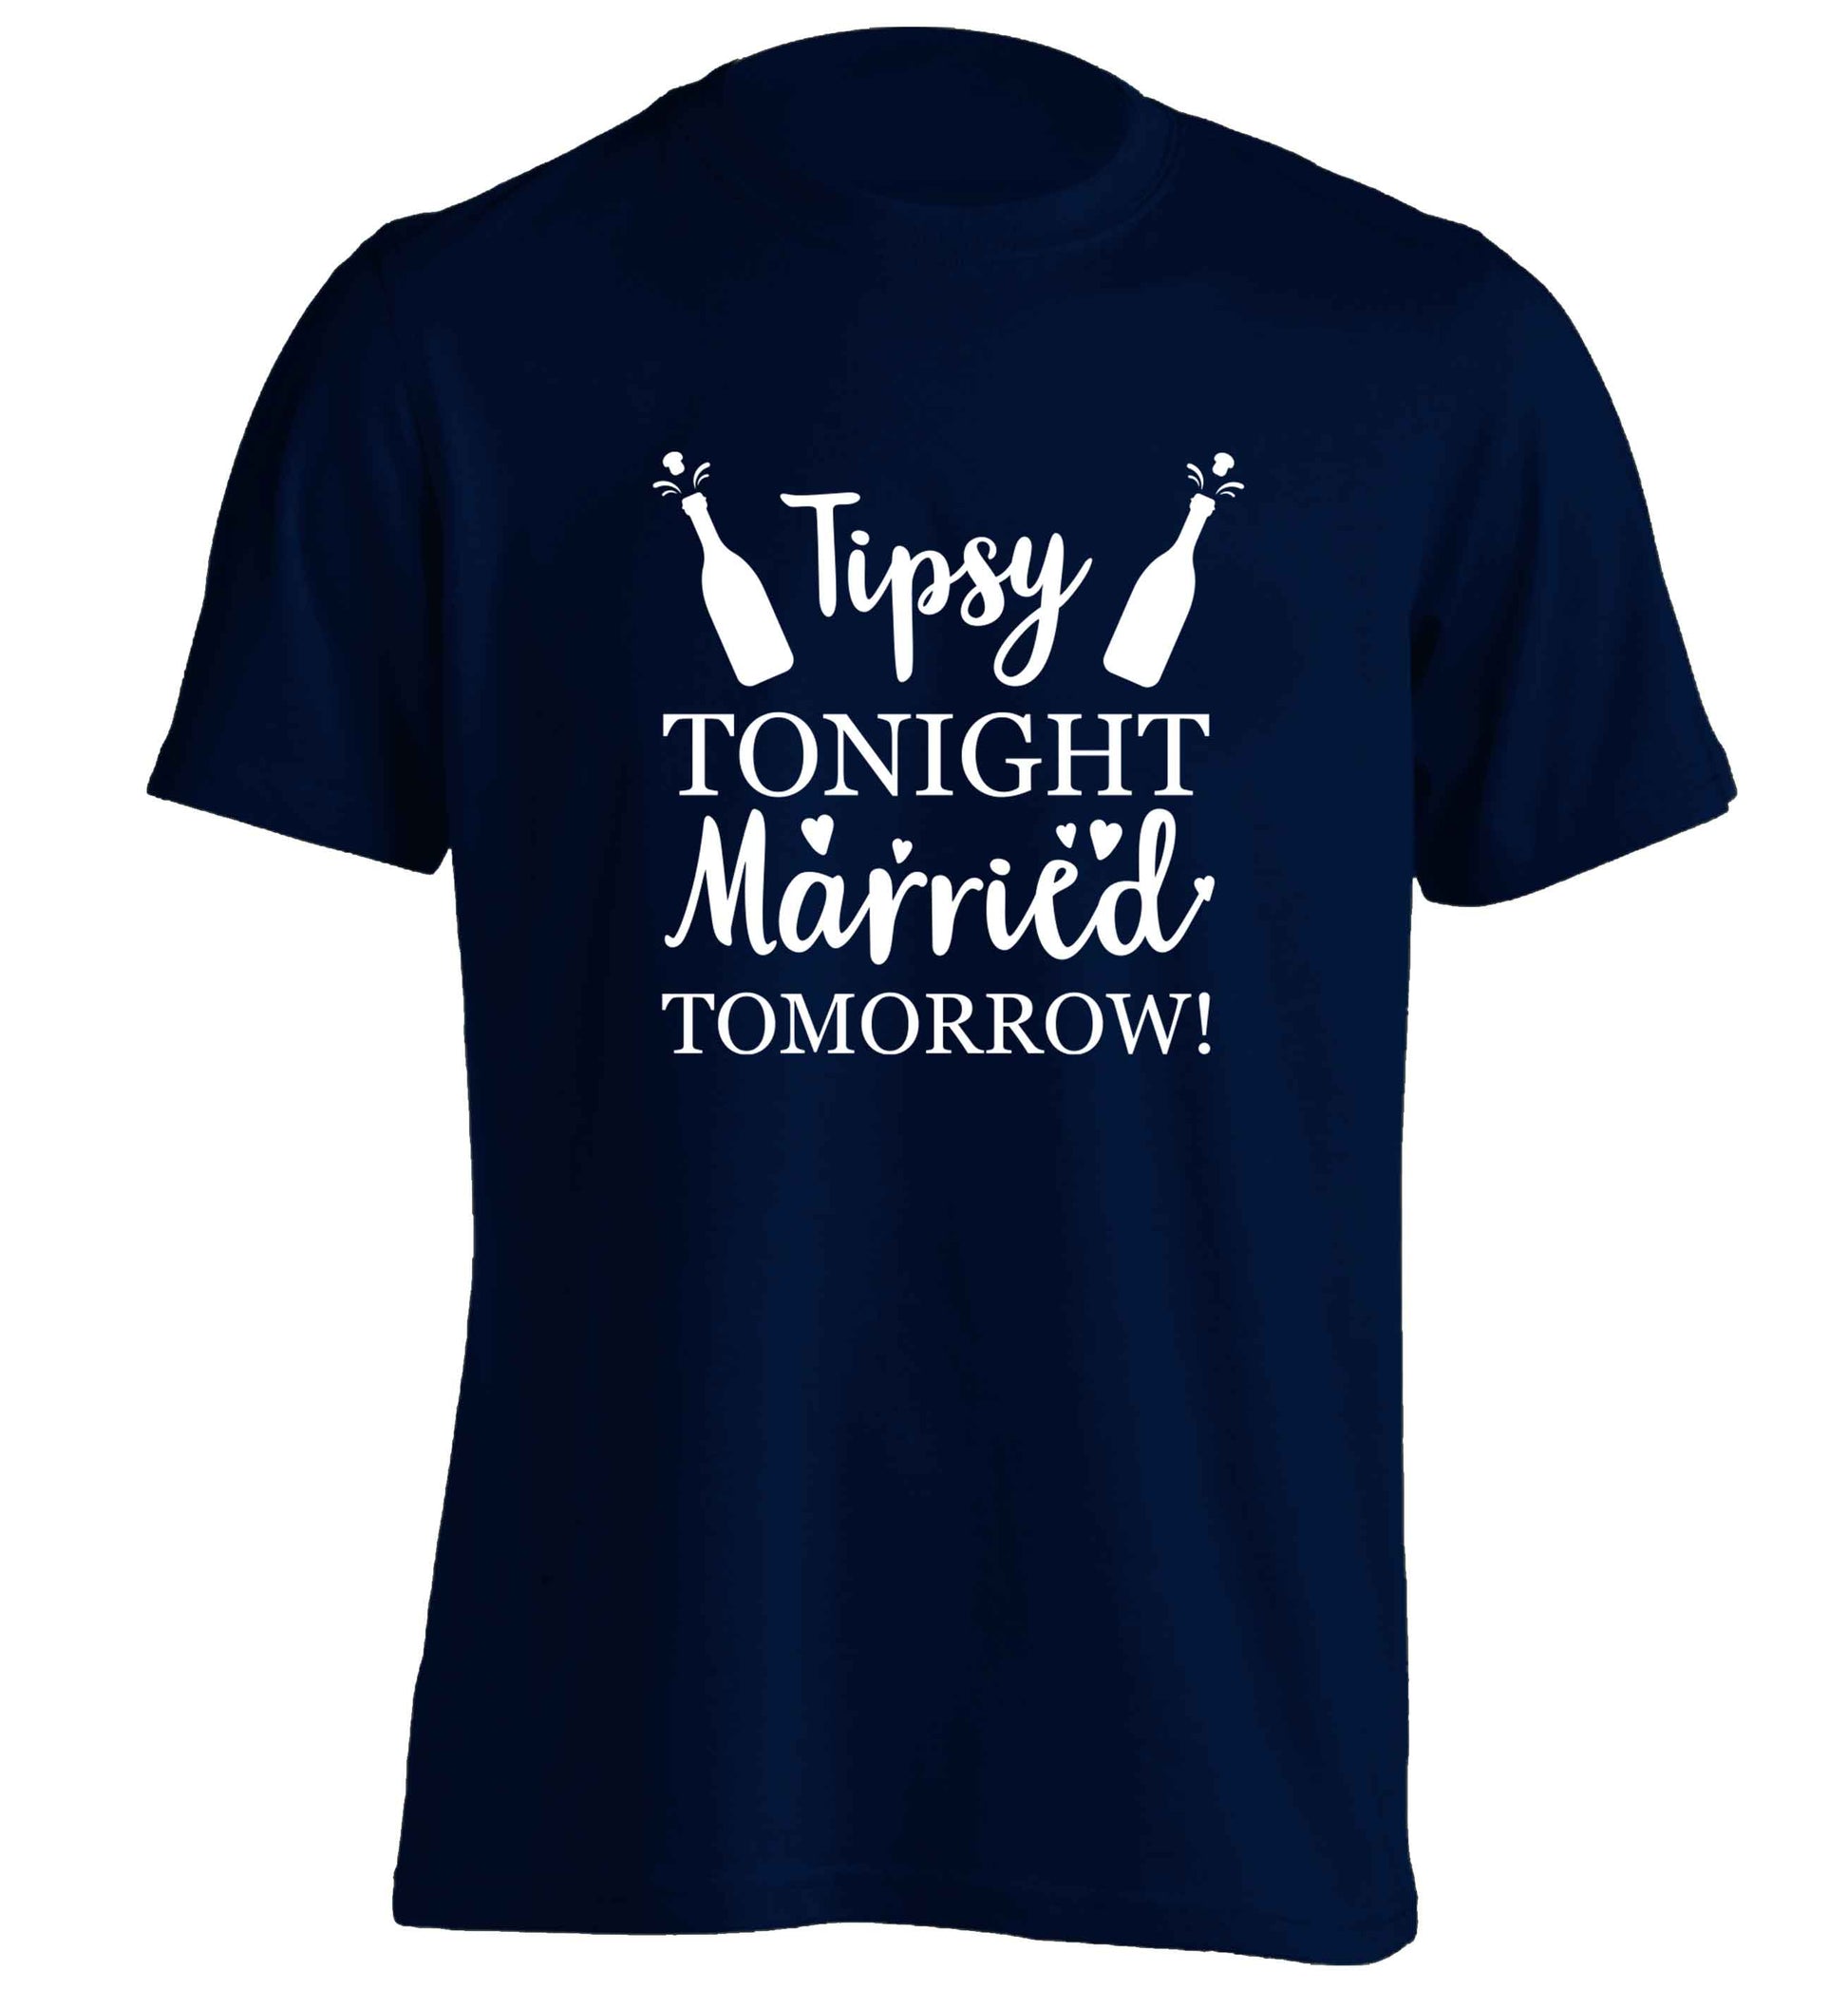 Personalised wedding thank you's Mr and Mrs wedding and date! Ideal wedding favours! adults unisex navy Tshirt 2XL